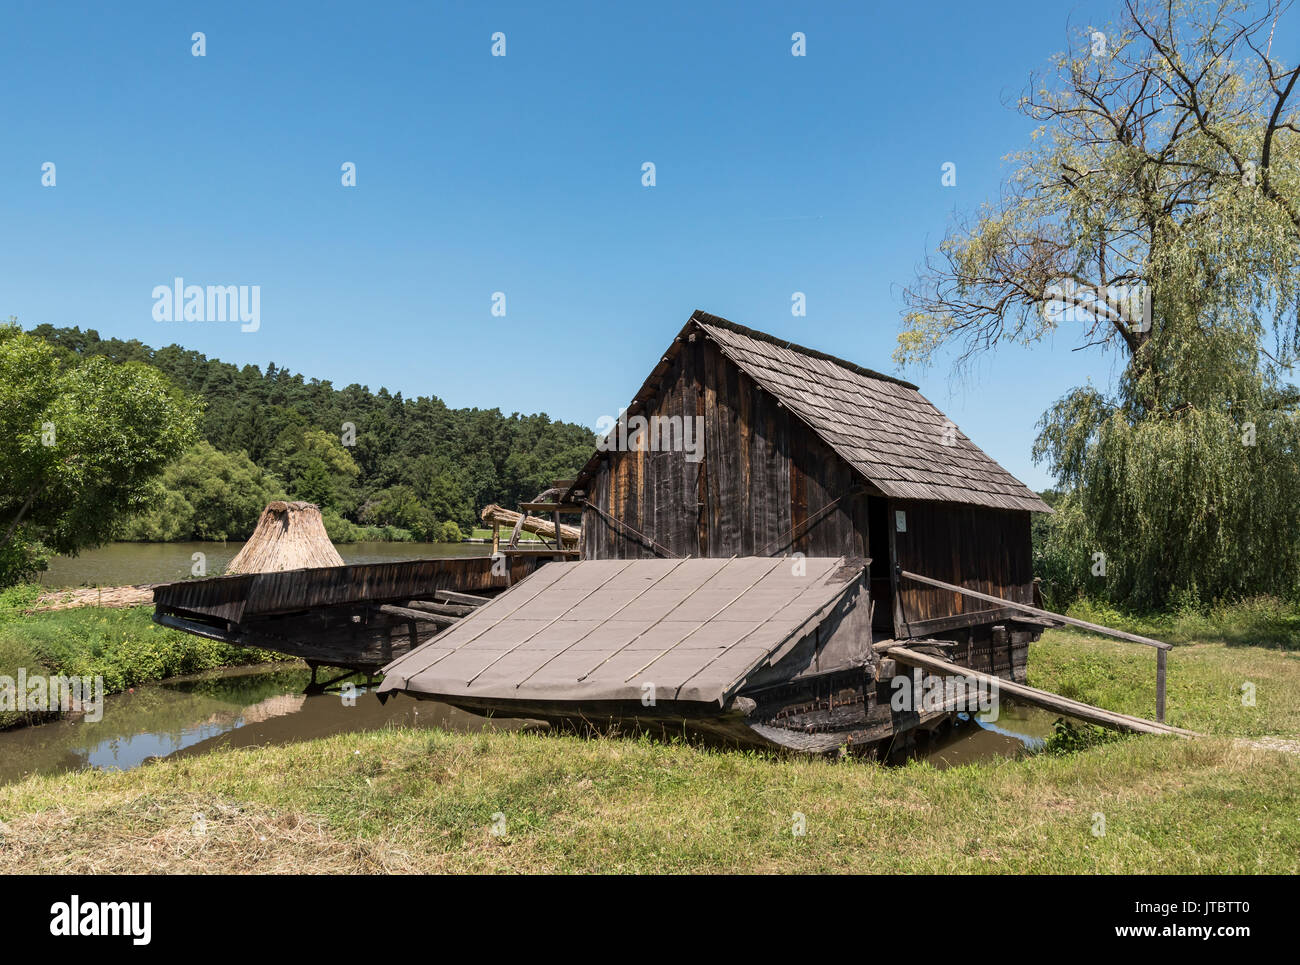 A mill in the Astra Museum of Traditional Folk Civilization, Sibiu, Romania Stock Photo